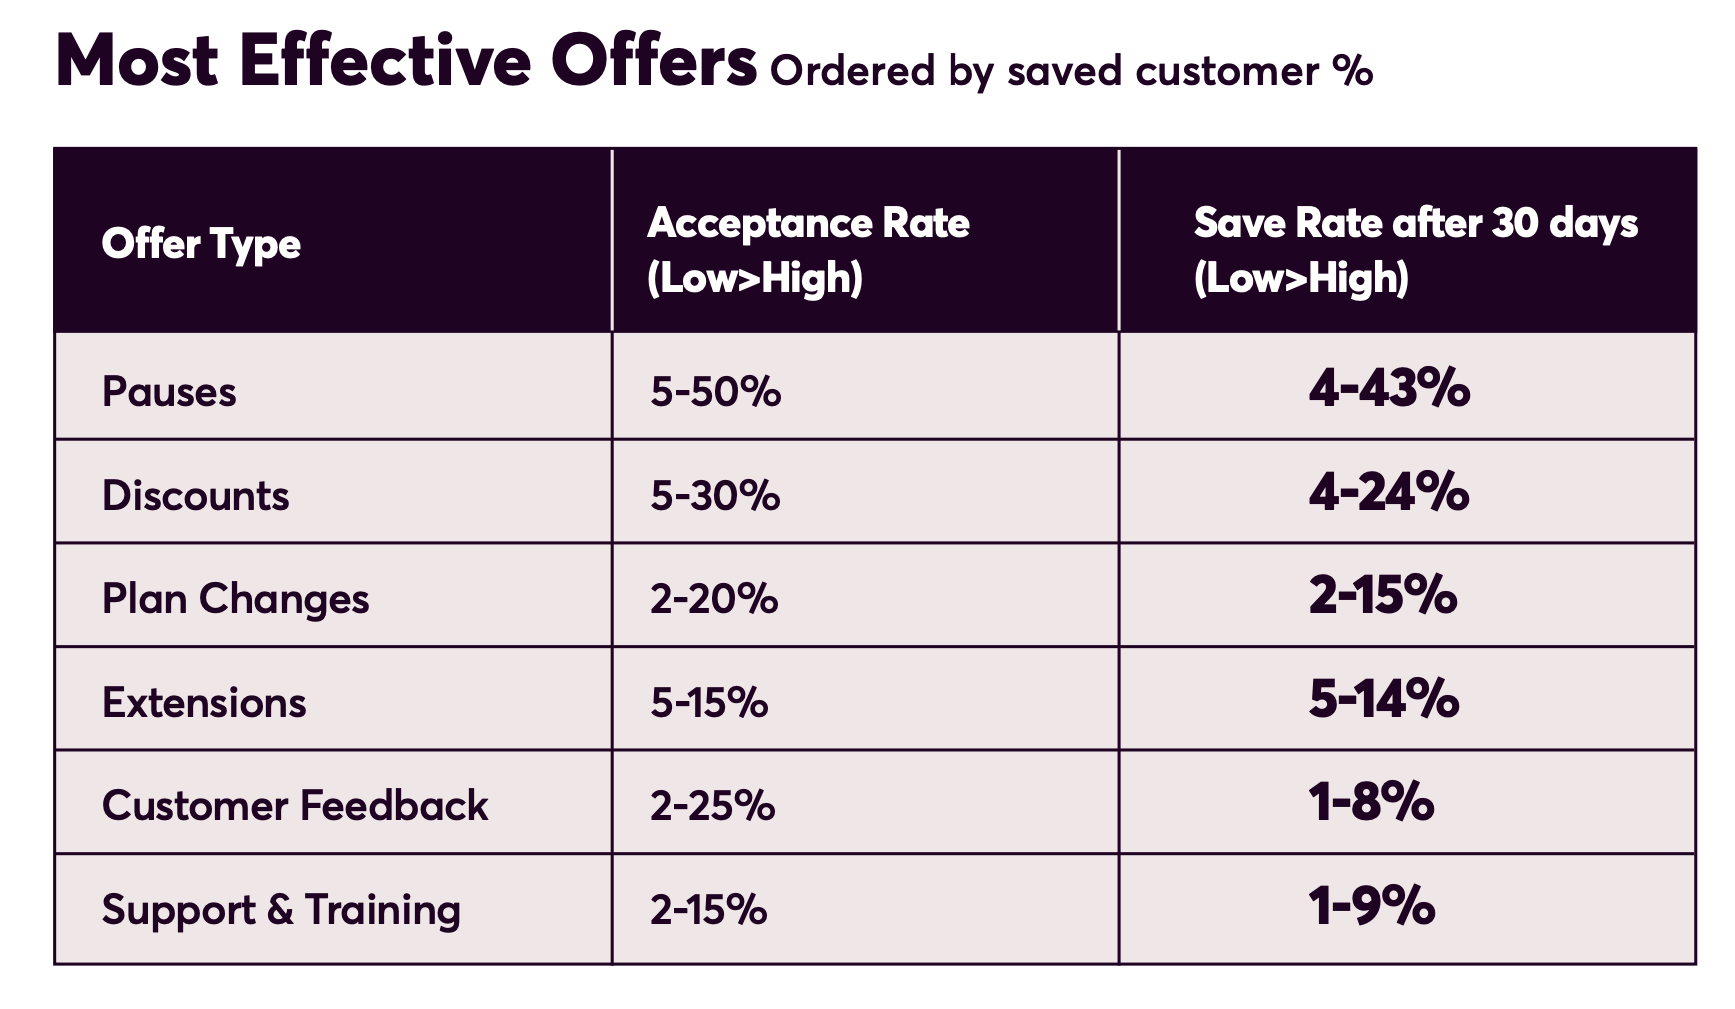 For customer retention in subscription eCommerce, subscription pauses took precedence over discounts at the offer stage in the retention lifecycle